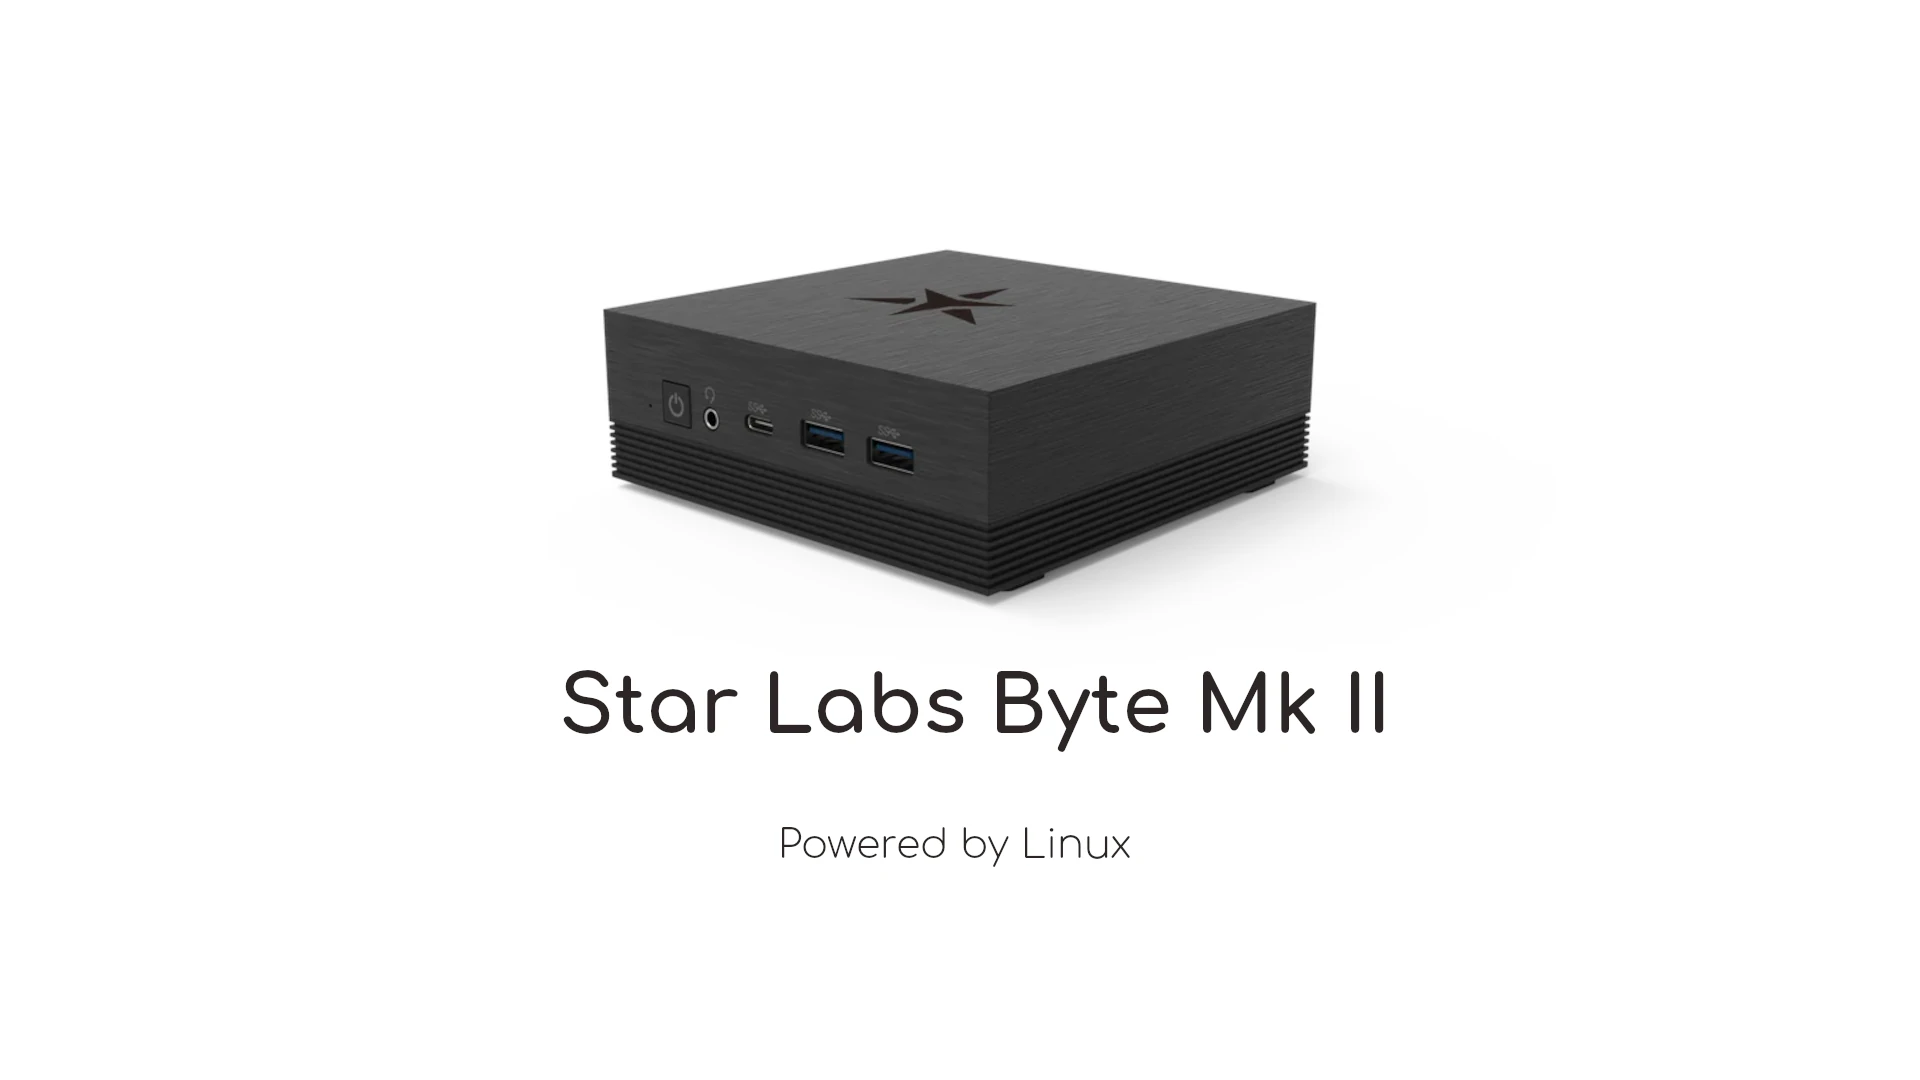 Star Labs Unveils the Byte Mk II Mini Linux PC, Drops AMD for Intel CPU